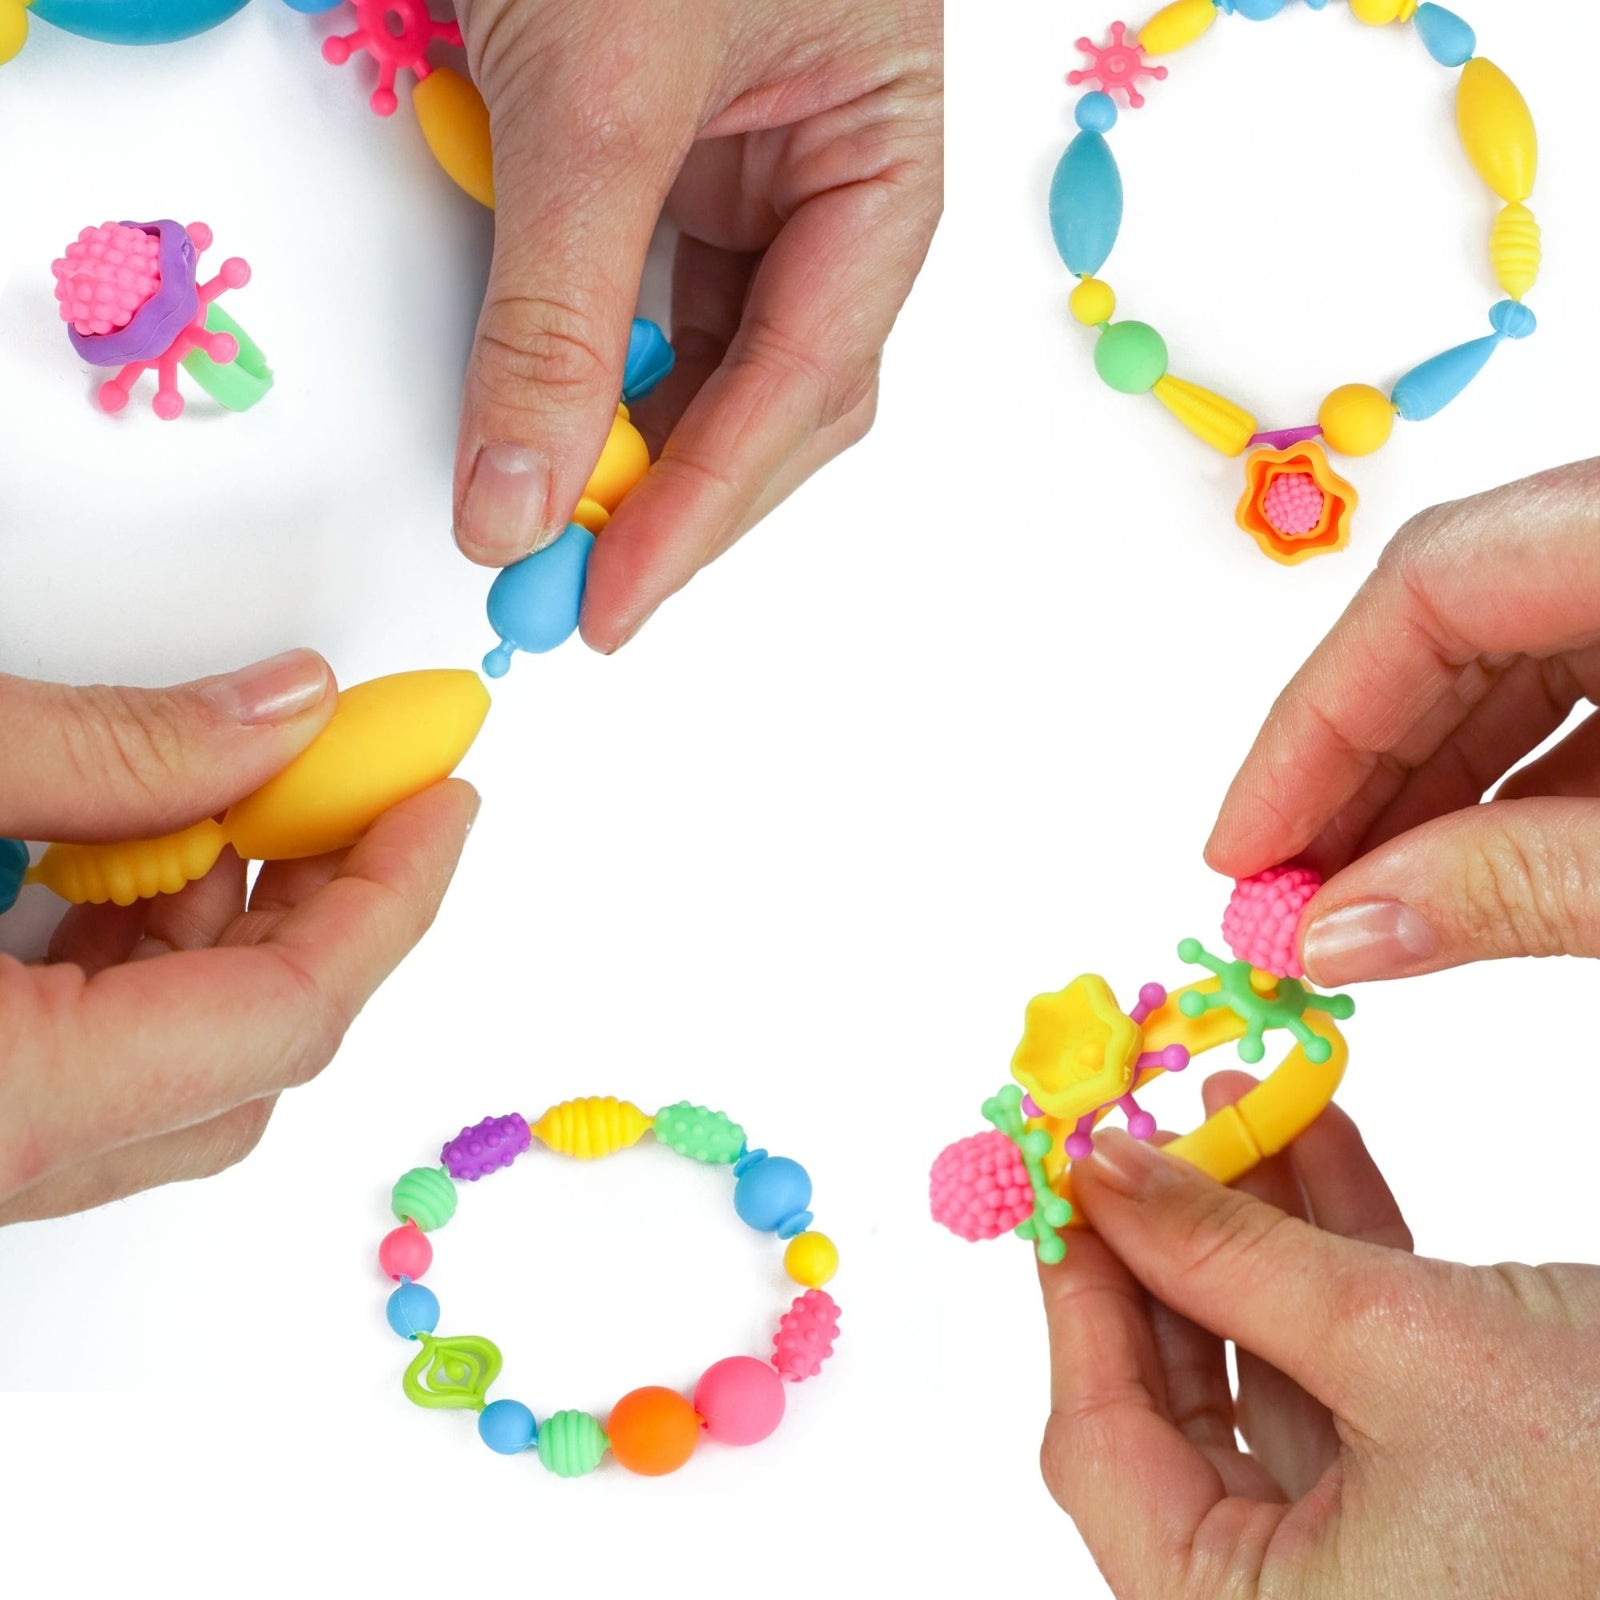 Pop Beads Jewelry making Kit for Kids, Jewelry making Crafts with Sequin Hip bag - Axel Adventures